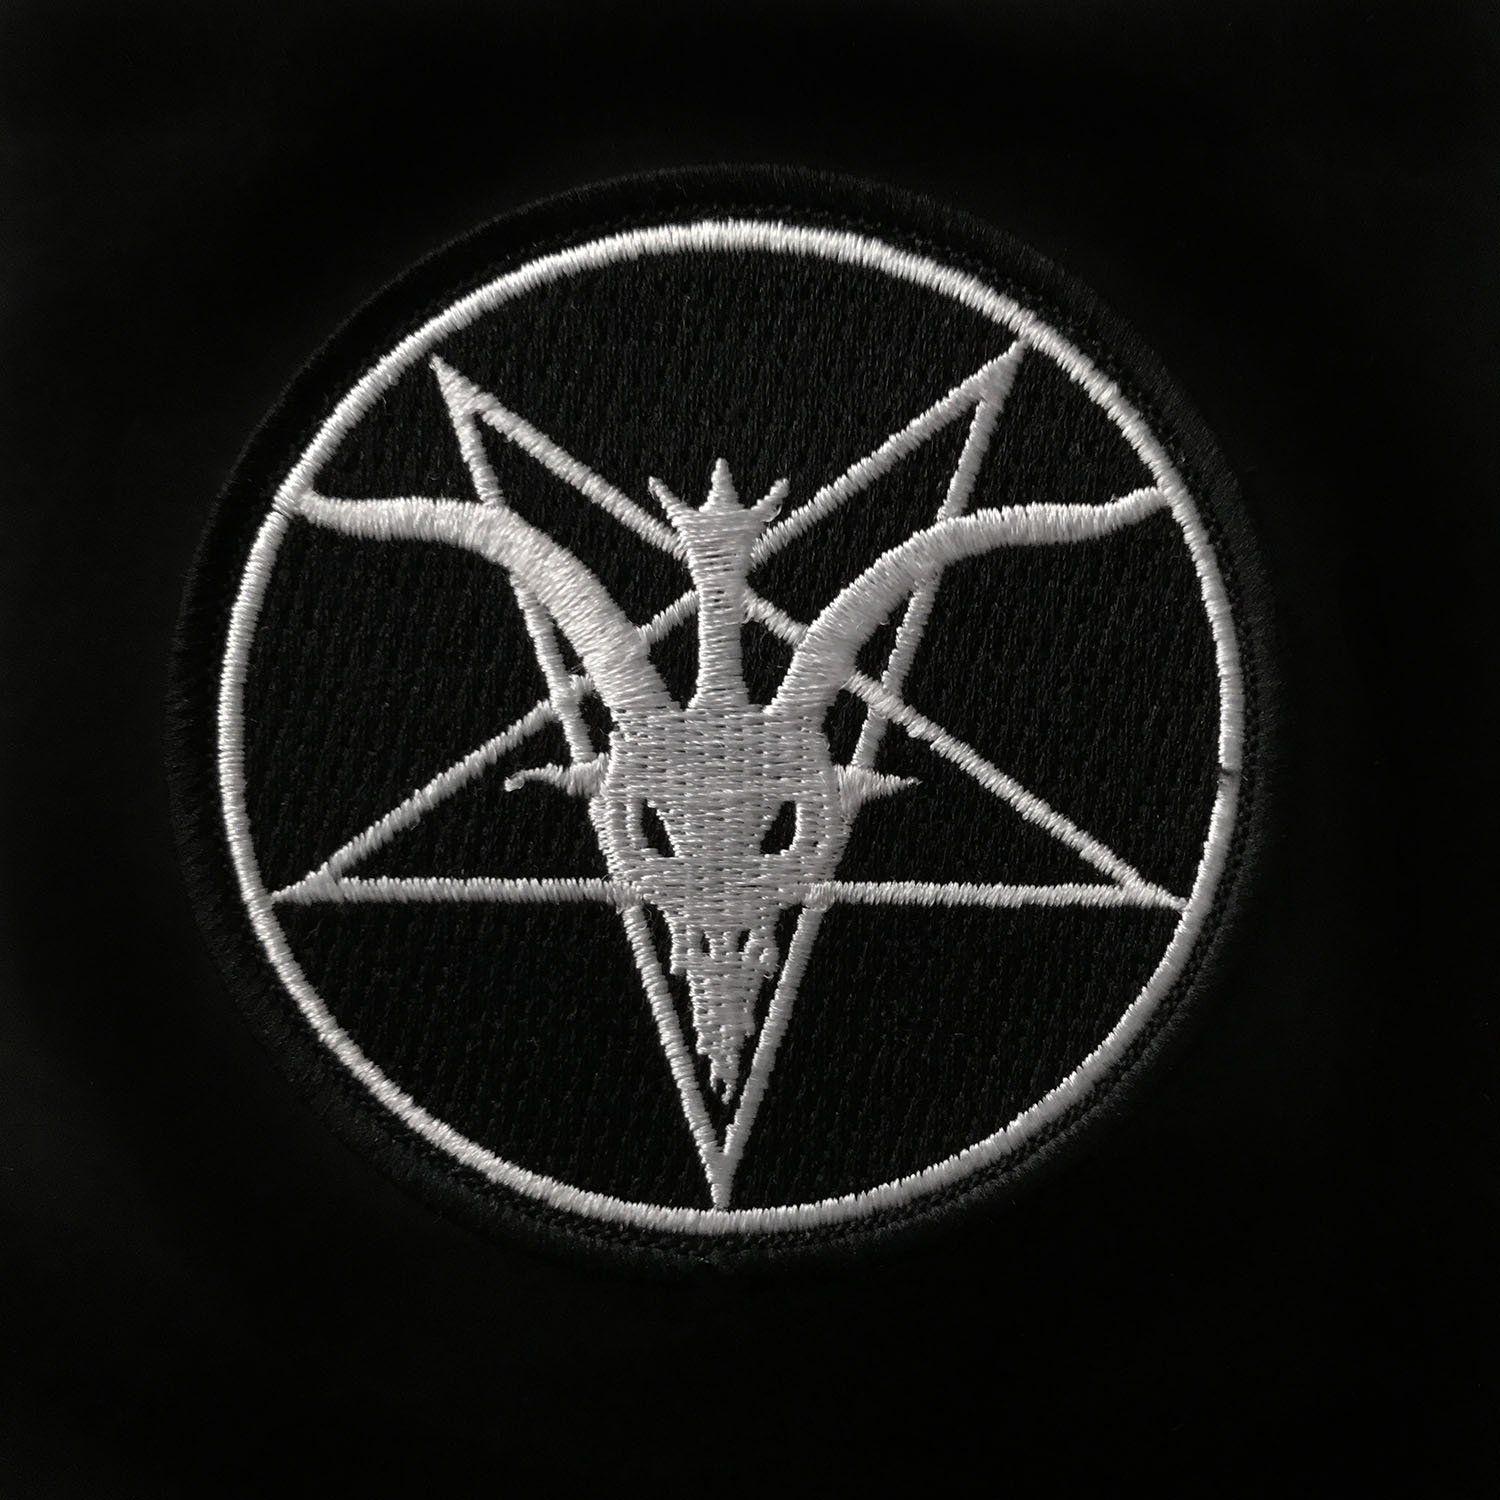 Red and Gray with an S' Logo - TST Logo Patch in Black or Red New Designs Satanic Temple